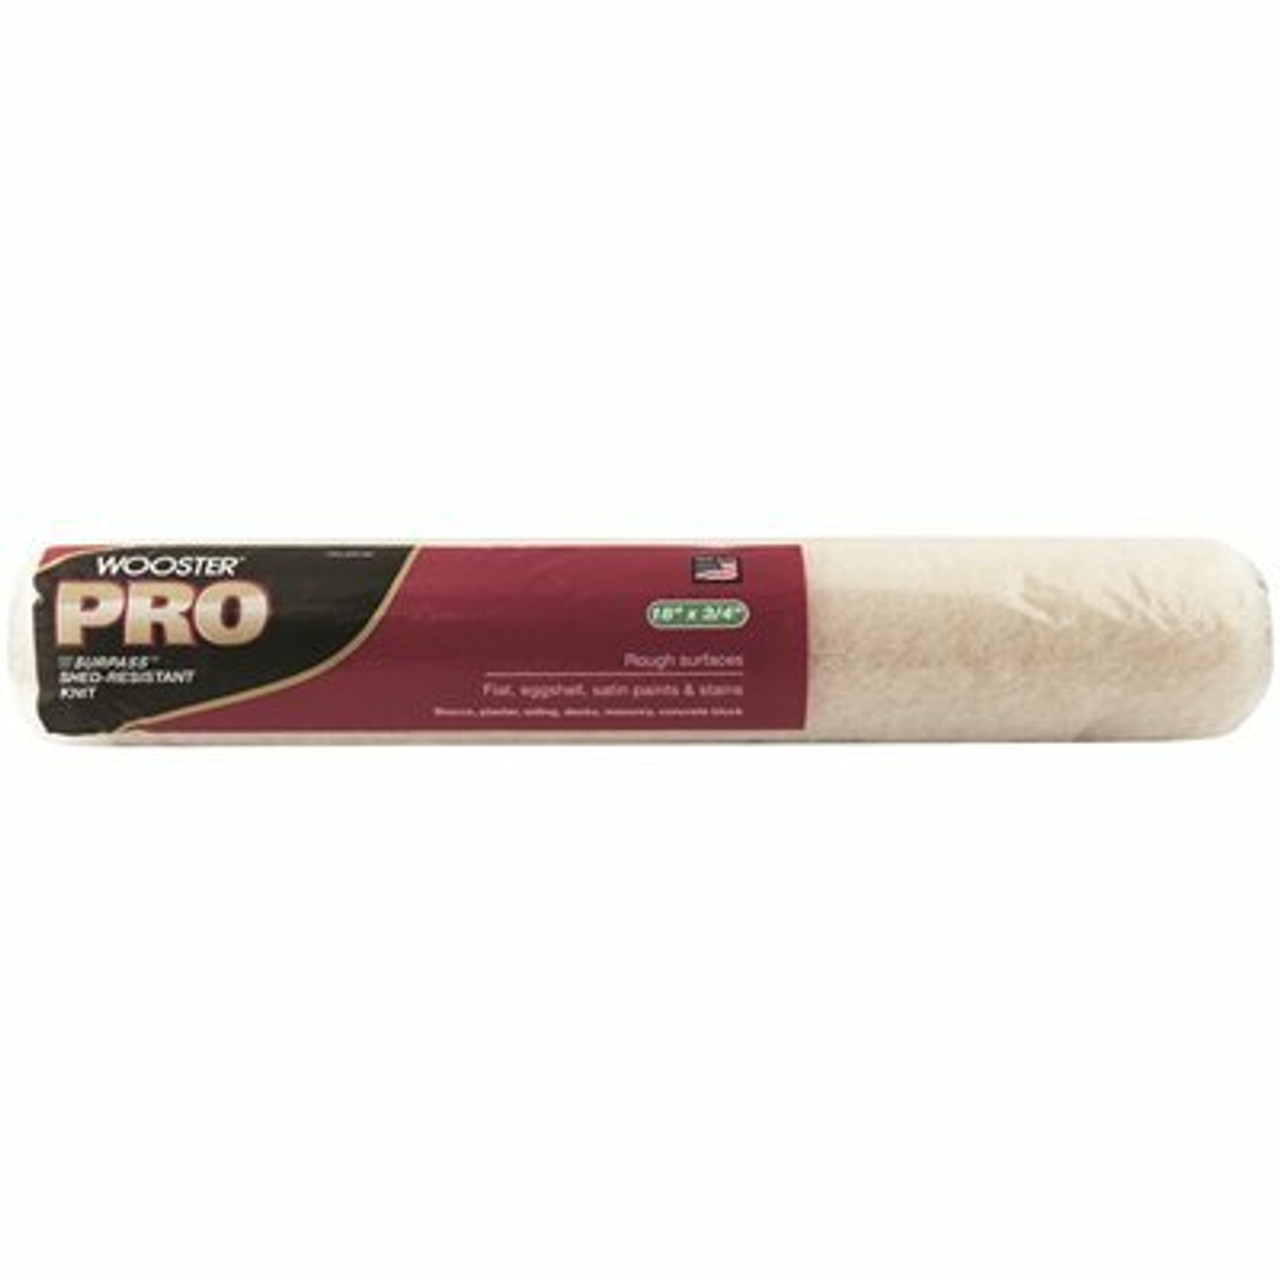 Wooster 18 In. X 3/4 In. Pro Surpass Shed-Resistant Knit High-Density Fabric Roller Cover